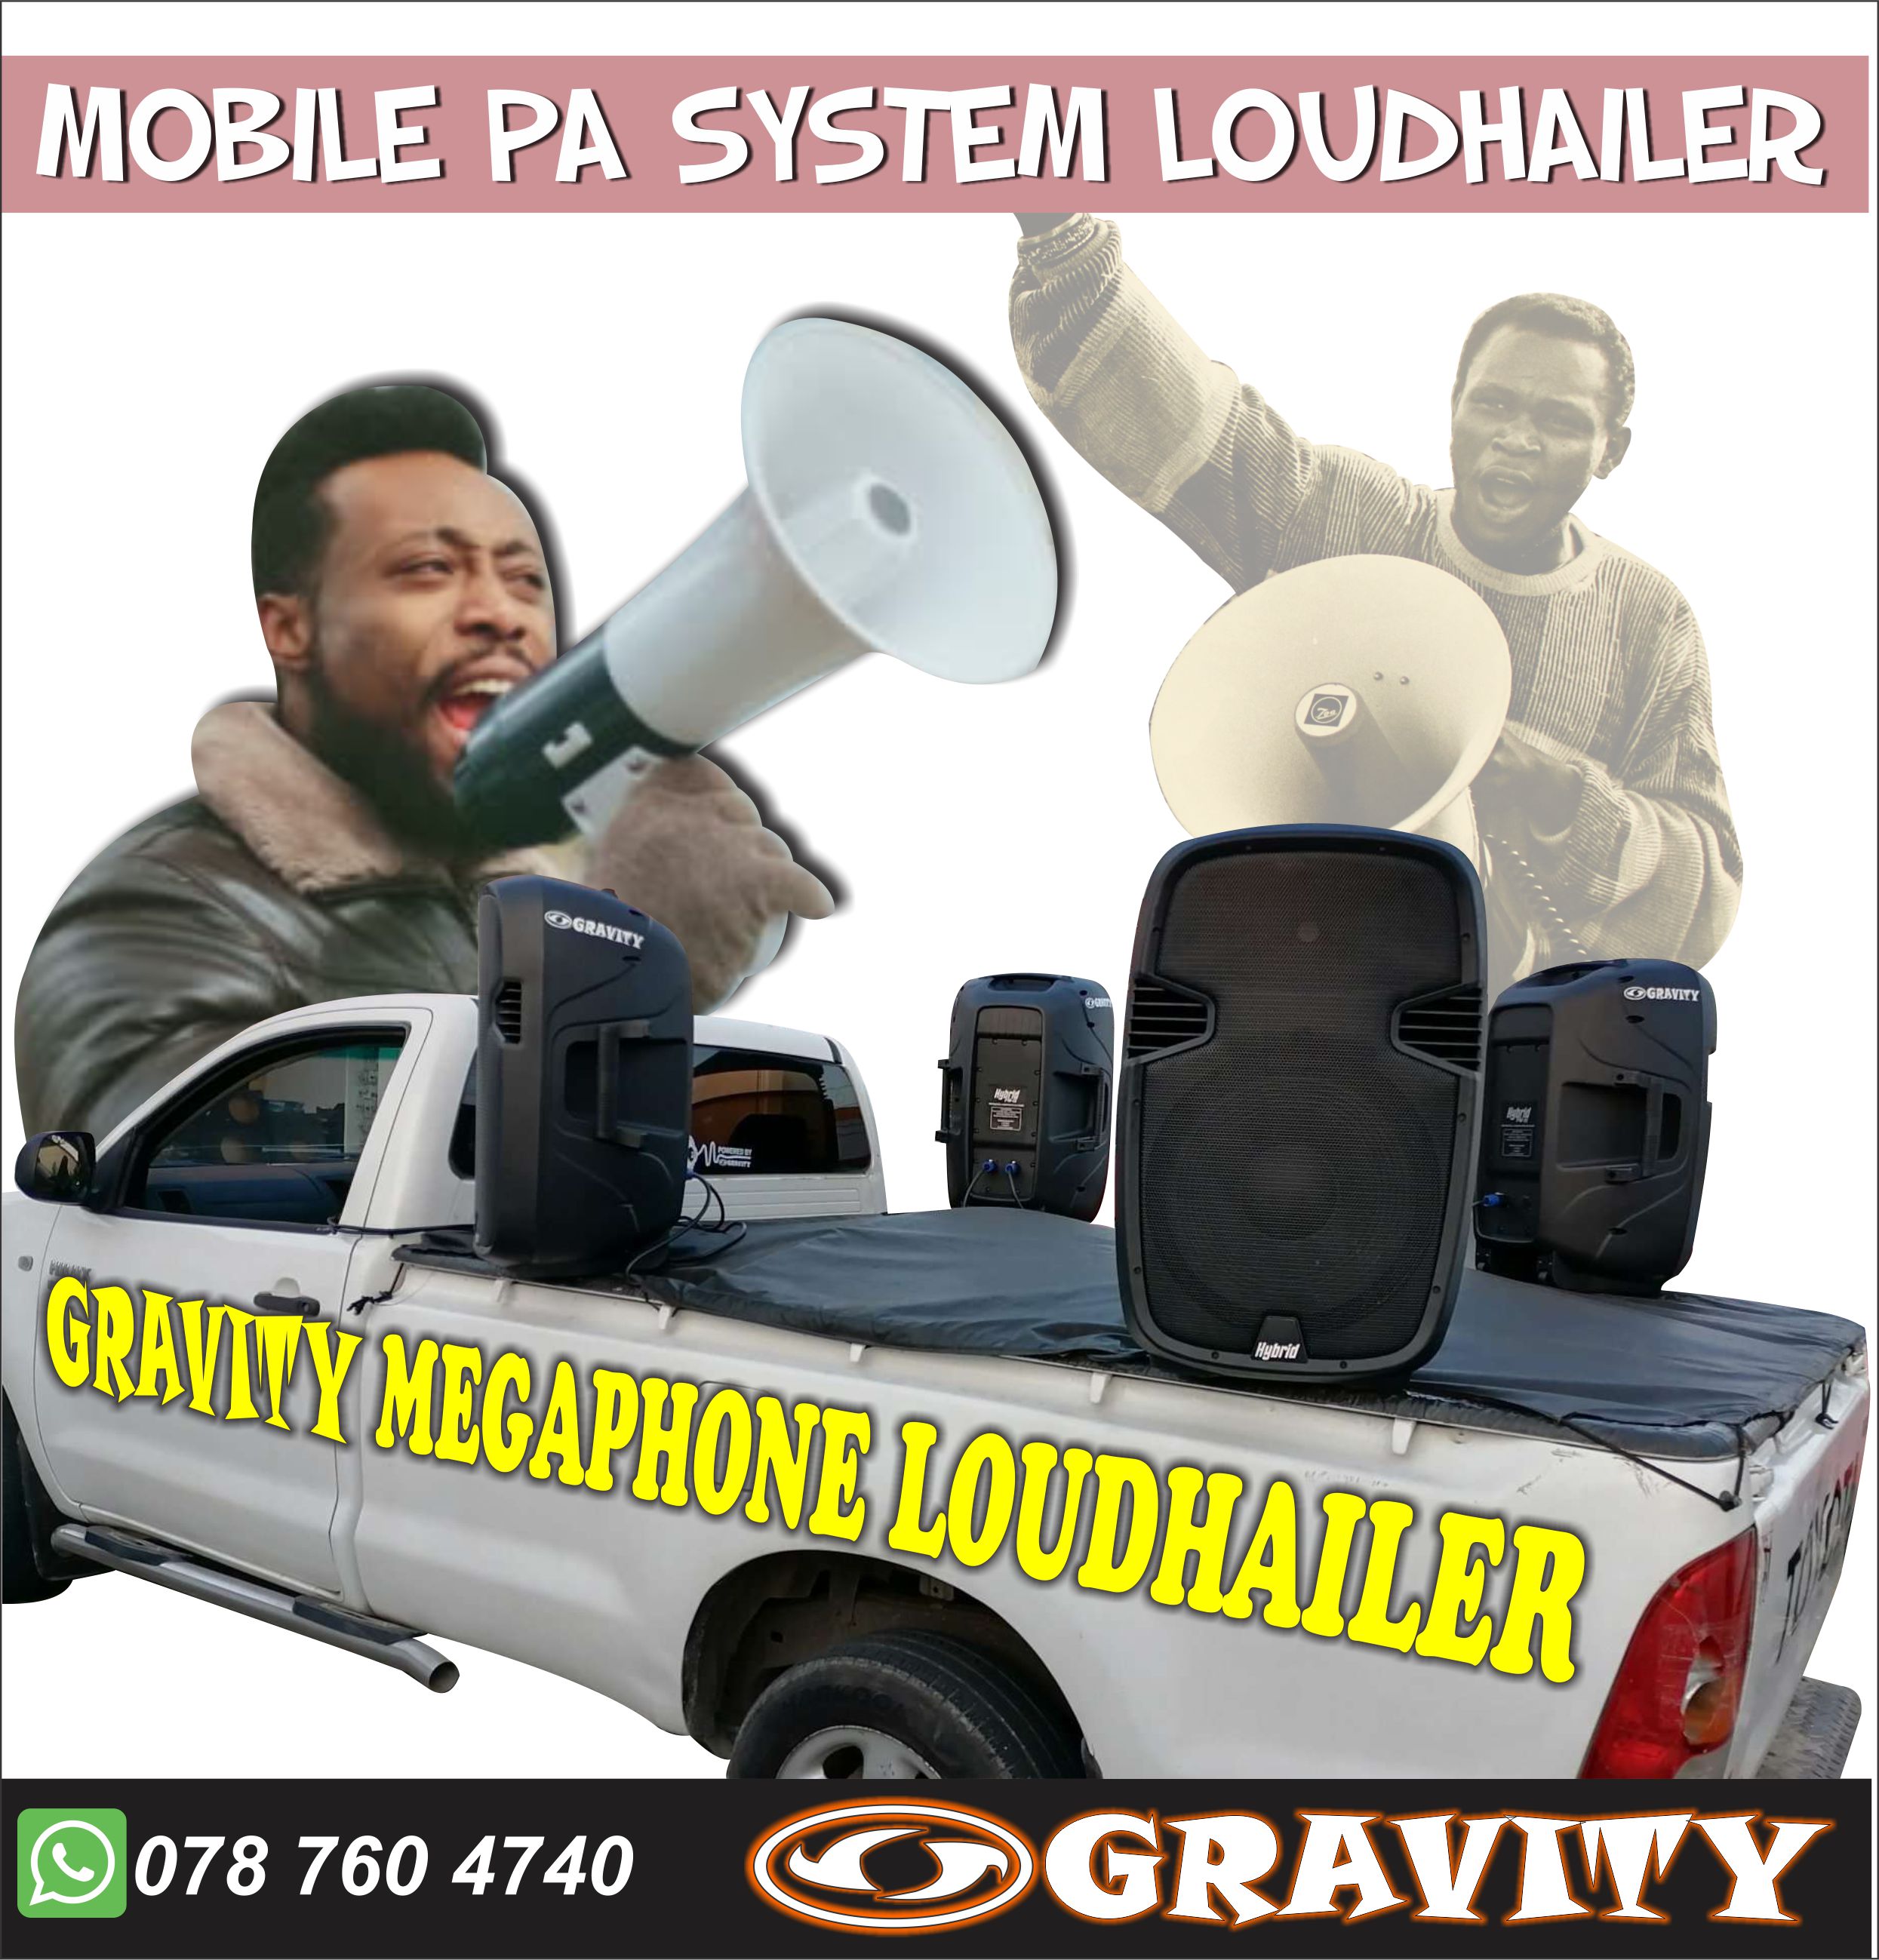 Megaphone Loudhailer Mic Speaker PUBLIC ADDRESS BROADCASTING SYSTEMS DURBAN elections megaphone loudhailer | deal megphones mic system for all your outdoor events like rallys, marches, political rallys and announcements Political Elections outdoor announcements available at gravity dj store 0315072736  0315072463  . Megaphone Loudspeaker ANC elections outdoor events announcements 0315072463  DA political elections megaphone mic speaker needed at gravity dj store 0315072463  -with handheld mic OR without  -battery operated  -12v car power compatible  -Different sizes available:    * 5w / 15w  25w / 40w  loudspeaker horn loud hailer megaphone...`CALL STORE FOR AVAILABILITY  -sling strap carry about loudspeaker   -portable loudspeaker megaphone  -outdoor handheld mobile loudspeaker  Megaphones, loudhailers, and pa amplifiers used in public hearings, schools and elections a system of microphones, amplifiers, and loudspeakers used to amplify speech or music in a large building or at an outdoor gathering.This article is about audio systems. For public IP addresses, see IP address.Durable sound for events, evacuation, meetings and political rallies. Professional advice is free and is a phone call away Megaphone  From Wikipedia, the free encyclopedia This article is about the amplification device. For the chemical compound, see Megaphone (molecule). For other uses, see Megaphone (disambiguation). "Bullhorn" redirects here. For the G.I. Joe character, see Bullhorn (G.I. Joe). For the type of tree, see Bullhorn Acacia.   A late 19th-century speaking trumpet used by firefighters.   A small sports megaphone for cheering at sporting events, next to a 3 in. cigarette lighter for scale   Drawing by Athanasius Kircher, 1684, shows man (left) using megaphone to communicate over distance A megaphone, speaking-trumpet, bullhorn, or loud hailer is a portable, usually hand-held, cone-shaped acoustic horn used to amplify a person’s voice or other sounds and direct it in a given direction. The sound is introduced into the narrow end of the megaphone, by holding it up to the face and speaking into it, and the sound waves radiate out the wide end. The megaphone increases the volume of sound by increasing the acoustic impedance seen by the vocal cords, matching the impedance of the vocal cords to the air, so that more sound power is radiated. It also serves to direct the sound waves in the direction the horn is pointing. It somewhat distorts the sound of the voice because the frequency response of the megaphone is greater at higher sound frequencies. Since the 1960s the voice-powered acoustic With Edison’s megaphone, a low whisper could be heard a thousand feet away, while a normal tone of voice could be heard roughly two miles away. On the listening end, the receiver could hear a low whisper at a thousand feet away. However the apparatus was much too large to be portable, limiting its use. George Prescott wrote: “The principal drawback at present is the large size of the apparatus.”   Since the 1960s acoustic megaphones have generally been replaced by electric versionmegaphone described above has been replaced by the electric megaphone, which uses electric power to amplify the voice.Electric megaphones[edit]     (left) Woman using a handheld electric megaphone at a demonstration in Portugal. (right) Electric megaphones use a type of horn loudspeaker called a reflex or reentrant horn. The sound waves travel in a zigzag path through concentric widening ducts (b, c, and d). An electric megaphone is a handheld public address system, an electronic device that amplifies the human voice like an acoustic megaphone, using electric power. It consists of a microphone to convert sound waves into an electrical audio signal, an amplifier powered by a battery to increase the power of the audio signal, and a loudspeaker to convert the audio signal to sound waves again. Although slightly heavier than acoustic megaphones, electric megaphones can amplify the voice to a higher level, to over 90 dB. They have replaced acoustic megaphones in most applications, and are generally used to address congregations of people wherever stationary public address systems are not available; at outdoor sporting events, movie sets, political rallies, and street demonstrations.   Although electronic public address systems have existed since vacuum tube amplifiers were developed in the early 1920s, vacuum tube versions were too heavy to be portable. Practical portable electric megaphones had to await the development of microelectronics which followed the invention of the transistor in 1947. In 1954, TOA Corporation developed the EM-202, the world's first transistorized megaphone.[4]   Handheld versions are shaped generally like the old acoustic megaphone, with a microphone at one end and a horn speaker at the other, and a pistol grip on the side, with a trigger switch to turn it on. In use, the device is held up to the mouth, and the trigger is pressed to turn it on while speaking. Other larger versions hang from the shoulder on a strap, and have a separate handheld microphone on a cord to speak into, so users can address a crowd without the instrument obscuring their faces. A vast array of modern electric megaphones are available to puPortable megaphones are widely used for crowd management and mass communication. When needing to transmit important information or to guide a large number of people, an electric megaphone is valuable if other public announcement systems are not present.   Besides their practical implications, public address systems, including megaphones, also had a social impact. Public address systems helped promote women’s participation in society. In events like the National Republican and Democratic Conventions of 1920, when electronic public address systems were first becoming popularized, women used these amplifying technologies during roll call of participants.[6] Later, portable electric megaphones extended this equalizing influence to outdoor events.   Cheerleading is one of the few fields that still uses acoustic megaphones. Cheerleaders at the University of Minnesota are credited with first using acoustic megaphones in routines in 1898. Since then, cheerleaders have relied heavily on acoustic megaphones during performances at sporting events. Generally, female cheerleaders would use pom pons while male cheerleaders, with loud booming voices, would project cheers through megaphones. [7] Vocal projection is an important aspect for cheerleading, so experts recommend the use of acoustic megaphonE MEGAPHONES / LOUDHAILERS   Megaphones / Loudhailers A megaphone, speaking-trumpet, bullhorn, or loud hailer is a portable, hand-held, funnel cone-shaped device whose application is to amplify a person’s voice towards a targeted direction and distance. Common uses for megaphones are at sporting events, political functions, electioneering, auctions, crowd control, emergency situations and generally when one needs to address congregations of people in large areas or outdoors. We have a very large range of megaphones for sale and deliver throughout South Africa.   see also: Vehicle PA Systems & Horn Speakers       Show:   (PAM001) Megaphone - Loudhailer 30W Pistol + Loose Mic  (PAM001) Megaphone - Loudhailer 30W Pistol + Loose Mic Megaphone / Loudhailer / Bullhorn 30W with Siren & Detachable Microphone This 30-Watt Megaphone comes with an attached remote microphone so you can deliver your message loud and clear without straining your arms. Carry the megaphone on your shoulder with the strap and talk into the microphone instead of holding the megaphone to your mouth. The PAM001 30W Megaphone is an incredibly loud megaphone that stands out due to how easy it i.. (PAM001C) Megaphone - Loudhailer 25W with Loose Mic & shoulder strap (PAM001C) Megaphone - Loudhailer 25W with Loose Mic & shoulder strap Shoulder Megaphone 25W with shoulder strap & stand This 25-Watt Megaphone comes with an attached remote microphone so you can deliver your message loud and clear without straining your arms. Carry the megaphone on your shoulder with the strap and talk into the microphone instead of holding the megaphone to your mouth. It also features a stand / feet so you can easily place it on a table or any flat surface. This is great for sports eve..(PAM002) Megaphone - Loudhailer 25W Handheld The built-in microphone makes this 25W megaphone very easy to use, and the built in siren can easily grab the attention of everyone in the area. 25W of power extends the radius in which your voice can be heard up to 600 meters. Horn diameter: Ø230 Length: 365mm Rated power: 25W Sound coverage: approx. 600m Material: ABS Net weight: 1450g Power requirement: 1.5V(size C) x 6 Speaking: default Siren: default .. (PAM003B) Megaphone 10W Mini Handheld With Record Function (PAM003B) Megaphone 10W Mini Handheld With Record Function (PAM003B) Megaphone 10W Mini Handheld With Record Function This mini megaphone has a 10 second recording function, which plays back in a loop. Great for when the same message has to be repeated over and over   Output Power: 10W Horn Diameter: 155mm Lenght: 245mm Range: Aprox 250 Meters Voice / Siren Switch Sliding volume control Fold away pistol grip handle with nylon carry strap Power Requirement: 4 x .. (PAM005) Megaphone / Loudhailer 45W with Siren & Detachable Mic (PAM005) Megaphone / Loudhailer 45W with Siren & Detachable Mic Megaphone / Loudhailer / Bullhorn 45W with Siren & Detachable Microphone This 45-Watt Megaphone is very powerfull and gives a very wide dispesion of sound. It comes with an attached remote microphone so you can deliver your message loud and clear without straining your arms. Carry the megaphone on your shoulder with the strap or place the megaphone on a table and talk into the microphone instead of holding the complete megaphone to you.. (PAM006) Handheld Megaphone 35W Talk,siren, and MP3 Player (PAM006) Handheld Megaphone 35W Talk,siren, and MP3 Player USB and SD inputs for playback of MP3s via megaphone 700 to 1000 meter range Handheld microphone with spiral cable and anti-feedback switch Comfortable handling thanks to low weight and ergonomic handle Low energy consumption Weatherproof design Power: 35W Connections: 1 x USB, 1 x SD Playable formats: MP3 Microphone holder Built-in siren Lightweight, sturdy ABS housing Adjustable volume Hand..A range of  megaphones and loudhailers for public address, electioneering use. Megaphones for sale in South Africa. keywords" content="megaphones, loudhailers, bullhorns, megaphone, handheld megaphone, loudhailer, loud hailer, bull horn, megaphone south africa, megaphone durban, elections megaphones, electioneering megaphones "Public announcement" redirects here. For the musical group, see Public Announcement (group).   Horn loudspeakers are often used to broadcast sound in outdoor locations   US Navy Rear Admiral Michelle J. Howard uses the 1MC shipboard public address system to address the crew of USS Wasp (LHD 1)   General quarters MENU0:00 A call to general quarters aboard a United States Navy vessel. Problems playing this file? See media help. A public address system (PA system) is an electronic sound amplification and distribution system with a microphone, amplifier and loudspeakers, used to allow a person to address a large public, for example for announcements of movements at large and noisy air and rail terminals or at a sports stadium. The term is also used for systems which may additionally have a mixing console, and amplifiers and loudspeakers suitable for music as well as speech, used to reinforce a sound source, such as recorded music or a person giving a speech or distributing the sound throughout a venue or building.   Simple PA systems are often used in small venues such as school auditoriums, churches, and small bars. PA systems with many speakers are widely used to make announcements in public, institutional and commercial buildings and locations. Intercom systems, installed in many buildings, have microphones in many rooms allowing the occupants to respond to announcements.   Sound reinforcement systems and PA systems may use some similar components, but with differing application, although the distinction between the two is not clear-cut. Sound reinforcement systems are for live music or performance, whereas PA systems are primarily for reproduction of speech.[1] In Britain any PA system he simplest PA systems consist of a microphone, an amplifier, and one or more loudspeakers. Simple and small PA systems of this type, often providing 50 to 200 watts of power, are often used in small venues such as school auditoriums, churches, and small bars. A sound source such as a Compact Disc player or radio may be connected to a PA system so that music can be played through the system.   Public address systems consist of input sources, amplifiers, control and monitoring equipment, and loudspeakers. The primary input sources are microphones for live announcements and a source of recorded sound. There may be a system which allows operators, or automated equipment, to select from a number of standard prerecorded messages. These input sources are fed into preamplifiers and signal routers that determine the zones to which the audio signal is fed. The preamplified signals are then passed into the amplifiers. Depending on local practices these amplifiers will usually amplify the audio signals to 50V, 70V or 100V speaker line level.[14] Control equipment monitors the amplifiers and speaker lines for faults before it reaches the loudspeakers. This control equipment is also used for separating zones in a PA system. The loudspeaker is used to convert electrical signals into sound.Large systems[edit]   Public Address System consisting of amplifiers, mixers, and routers for a major international airport Some PA systems have speakers that cover an entire campus of a college or industrial site, or an entire outdoor complex (e.g., an athletic stadium). A large PA system may also be used as an alert system during an emergency.   Telephone paging systems[edit] Some analog or IP private branch exchange (PBX) telephone systems use a paging facility that acts as a liaison between the telephone and a PA amplifier. In other systems, paging equipment is not built into the telephone system. Instead the system includes a separate paging controller connected to a trunk port of the telephone system. The paging controller is accessed as either a designated directory number or central office line. In many modern systems, the paging function is integrated into the telephone system, and allows announcements to be played over the phone speakers.   Many retailers and offices choose to use the telephone system as the sole access point for the paging system, because the features are integrated. Many schools and other larger institutions are no longer using the large, bulky microphone PA systems and have switched to telephone system paging, as it can be accessed from many different points in the school.PA over IP[edit] PA over IP refers to PA paging and intercom systems that use an IP network instead of a centralized amplifier to distribute the audio signal to paging locations across a building or campus, or anywhere else in the reach of the IP network (including the Internet). Network-attached amplifiers and intercom units are used to provide the communication function. At the transmission end, a computer application transmits a digital audio stream via the local area network, using audio from the computer's sound card inputs or from stored audio recordings. At the receiving end, either specialized intercom modules (sometimes known as IP speakers) receive these network transmissions and reproduce the analog audio signal. These are small specialized network appliances addressable by an IP address just like any other computer on the network.[15]   Such systems are inter-connected by the networking infrastructure and thus allow loss-less transmission to remote locations across the Internet or a local area or campus network. It is also possible to provide for multiple or relocatable transmission control stations on such a network.   Long line PA[edit]   London Underground employee making a Long Line Public Address system announcement using an RPA01 Radio Microphone at Bank Station A Long-Line Public Address (LLPA) system is any public address system with a distributed architecture, normally across a wide geographic area. Systems of this type are commonly found in the rail, light rail and metro industries and allow announcements to be triggered from one or several locations to the rest of the network over low bandwidth legacy copper, normally PSTN lines using DSL modems, or media such as optical fiber, or GSM-R, or IP-based networks.[16]   Rail systems typically have an interface with a passenger information system (PIS) server, at each station linked to train describers which state the location of rolling stock on the network from sensors on trackside signaling equipment. The PIS system invokes a stored message to be played from a local or remote digital voice announcement system, or a series of message fragments to be assembled in the correct order, for example: " / the / 23.30 / First_Great_Western /Night_Riviera_sleeper_service / from / London_Paddington / to / Penzance / .... / will depart from platform / one / this train is formed of / 12_carriages /." Messages are routed via an IP network and are played on local amplification equipment. Taken together, the PA, routing, DVA, passenger displays and PIS interface are referred to as the customer information system (CIS), a term which itself is often used interchangeably with the term passenger information system.[citation needed]   Small venue systems[edit] Small clubs and bars use a fairly simple set-up, with large Front of House speakers and subwoofers aimed at the audience, and smaller monitor speakers aimed back at the performers so that they can hear their vocals and instruments. In many cases, the Front of House speakers are elevated, either by mounting them on poles or by "flying" them from anchors in the ceiling. The subwoofers do not need to be elevated. In the smallest coffeehouses and bars, the audio mixer may be onstage so that the performers can mix their own sound levels.[17] In larger bars, the audio mixer may be located in or behind the audience seating area, so that an audio engineer can listen to the mix and adjust the sound levels. The adjustments to the monitor speaker mix may be made by a single audio engineer using the main mixing board, or they may be made by a second audio engineer who uses a separate mixing board.     This small venue's stage shows a typical PA system. Large venue systems[edit] For popular music concerts, a more powerful and more complicated PA System is used to provide live sound reproduction. In a concert setting, there are typically two complete PA systems: the "main" system and the "monitor" system. Each system consists of a mixing board, sound processing equipment, amplifiers, and speakers. The microphones that are used to pick up vocals and amplifier sounds are routed through both the main and monitor systems. Audio engineers can set different sound levels for each microphone on the main and monitor systems. For example, a backup vocalist whose voice has a low sound level in the main mix may ask for a much louder sound level through her monitor speaker, so she can hear her singing.   The "main" system (also known as "Front of House", commonly abbreviated FOH), which provides the amplified sound for the audience, will typically use a number of powerful amplifiers driving a range of large, heavy-duty loudspeakers including low-frequency speaker cabinets called subwoofers, full-range speaker cabinets, and high-range horns. A large club may use amplifiers to provide 3000 to 5000 watts of power to the "main" speakers; an outdoor concert may use 10,000 or more watts. The "monitor" system reproduces the sounds of the performance and directs them towards the onstage performers (typically using wedge-shaped monitor speaker cabinets), to help them to hear the instruments and vocals. In British English, the monitor system is referred to as the "foldback". The monitor system in a large club may provide 500 to 1000 watts of power to several foldback speakers; at an outdoor concert, there may be several thousand watts of power going to the monitor system. At a concert in which live sound reproduction is being used, sound engineers and technicians control the mixing boards for the "main" and "monitor" systems, adjusting the tone, levels, and overall volume of the performance.     A line array speaker system and subwoofer cabinets at a live music concert Touring productions will travel with relocatable large line-array PA systems, sometimes rented from an audio equipment hire company. The sound equipment moves from venue to venue along with various other equipment such as lighting and projection.   Acoustic feedback[edit] All PA systems have a potential for audio feedback, which occurs when sound from the speakers is picked up by the microphone and is then re-amplified and sent through the speakers again. It often sounds like a loud high-pitched squeal or screech, and can occur when the volume of the system is turned up too high. Feedback only occurs when the loop gain of the feedback loop is greater than one, so it can always be stopped by reducing the volume sufficiently. Sound engineers take several steps to maximize gain before feedback, including keeping microphones at a distance from speakers, ensuring that directional microphones are not pointed towards speakers, keeping the onstage volume levels down, and lowering gain levels at frequencies where the feedback is occurring, using a graphic equalizer, a parametric equalizer, or a notch filter.he history of Public Address (P.A.) systems has started in ancient Greece where amphitheatres were designed so well that even the turning of pages by an orator could be heard in every seat. Panasonic P.A. systems combine the very latest technology in amplifiers, microphones and speakers to bring this ideal audio environment to modern public spaces. With these equipment so carefully designed, it looks as good as it sounds.   This unbeatable combination of auditory and visible quality has made Panasonic P.A. systems the choice of acoustic professionals for more than forty years. Innovations spanning the full spectrum of Panasonic electronic expertise now make them better than ever, whatever your application is.A public address system (PA system) is an electronic amplification system with a mixer, amplifier and loudspeakers, used to reinforce a sound source, e.g., a person giving a speech, a DJ playing prerecorded music, and distributing the sound throughout a venue or building.   Simple PA systems are often used in small venues such as school auditoriums, churches, and small bars. PA systems with a larger number of speakers are widely used in institutional and commercial buildings, to read announcements or declare states of emergency. Intercom systems, which are often used in schools, also have microphones in each room so that the occupants can reply to the central office.Suppliers of public address systems and PA and sound system components and accessories in Johannesburg, Gauteng.pa, public address,pa system,microphone,speaker,ceiling speaker,amplifier,tone generator,emergency pa, alarm,wall speakers,booster,horn speaker,venue, sound system,DJ,music,speaking,airport PUBLIC ADDRESS DOVECOR SPECIALIZES IN THE DESIGN, INSTALLATION AND SALES OF PUBLIC ADDRESS SYSTEMS OF ALL SIZES AND FOR ALL APPLICATIONS       We have supplied and installed systems all over South Africa, from factories to hospitals, schools, refineries, clinics and offices.   PA systems range from a basic Amplifier, single horn or cabinet speaker to arrays of horn speakers on each column in one of the largest warehouses in Jhb. So we should be able to help you with your requirements.What is a public address system? A public address system (PA system) is an electronic sound amplification and distribution system with a microphone, amplifier and loudspeakers, used to allow a person to address a large audience. For example: announcements of movements at large and noisy air and rail terminals.   The term is also used for systems which may additionally have a mixing console, and amplifiers and loudspeakers suitable for music as well as speech, used to reinforce a sound source, such as recorded music or a person giving a speech or distributing the sound throughout a venue or building.   Simple PA systems are often used in small venues such as schools & churches, PA systems with speakers are widely used to make announcements in public, institutional and commercial buildings and locations. Intercom systems, installed in buildings, have microphones in rooms allowing the occupants to respond to announcements.   The simplest PA systems consist of a microphone, an amplifier, and one or more loudspeakers. Simple and small PA systems of this type, often providing 50 to 200 watts of power. A sound source such as a Compact Disc player or radio may be connected to a PA system so that music can be played through the system.   Sound reinforcement systems and PA systems may use some similar components, but with differing application, although the distinction between the two is not precise. Sound reinforcement systems are for live music or performance, whereas PA systems are primarily for reproduction of speech. Radio World cc - Pietermaritzburg, South Africa, Public Address Systems, Electronic Components, Energy Solutions Radio World cc - Pietermaritzburg, South Africa, Public Address Systems, Electronic Components, Energy Solutions School One-Way intercom system Example of a 40 classroom one-way intercom system Our range of portable PA systems is comprehensive. please scroll down for a selection of our range – if there is something you are looking for that you don’t see please don’t hesitate to contact us for more information.     MIPRO range    MIPRO are specialists at wireless portable sound systems. The MIPRO range provide solutions for all crowd sizes and is internationally renowned for its innovation, sound quality, and proven reliability, with a distribution network to over 75 countries.   MIPRO portable products are lightweight, features-packed, easy to use and provide outstanding value in today’s competitive electronics market place. If you have any queries please don’t hesitate to contact us.PUBLIC ADDRESS SYSTEMS   Just like electronic sirens, electronic public address systems are also devices designed for exterior and interior sound distribution. Unlike electronic sirens these systems have the output of the electronic amplifiers divided between several loudspeakers with lower output. The loudspeakers are therefore mounted closer to each other and are commonly connected to the amplifier via 100V distribution systems. The application of smaller outputs and a higher number of loudspeakers make it possible to improve notification clarity and coverage. On the other hand the costs of system establishment and maintenance increase substantially if the system is to cover larger areas. Mainly the lines are susceptible to failures, if they are not placed underground in a proper manner. Underground lines, however, would increase system establishment costs to an even greater extent.   Wireless public address systems The issues of unreliability and damage susceptibility, in particular in connection with aerial lines, are eliminated via the application of modern wireless public address systems. Wireless public address systems use radio communication for broadcasting both control signals and notifications. They basically consist of a radio broadcasting unit and radio speakers. The acoustic speakers are arranged within the designated area in the same manner as the loudspeakers of line broadcasters.   However, apart from loudspeakers, the acoustic speakers also contain an electronic amplifier and a radio receiver/transmitter. Simpler systems use a radio receiver only. Such acoustic speakers, however, are neither capable of sending status feedback, nor capable of examining the radio channel and thus cannot be used as a warning device, even in the simplest applications. Wireless public address systems do not require direct line connection to the central unit since they receive notifications and control commands via radio. They do, however, require a connection to the electric power network. Wireless public address systems are usually mounted on public lighting poles and at night, when lighting is on, their built-in batteries are being recharged to be used as a power supply system during the day. In some countries free radio channels are assigned to such systems making the establishment of these systems easier. These channels can be used if such wireless public address system is used only for informational purposes. Their use as a warning system, however, does not meet safety standards.   Public Address Systems, Electronic Public Address Systems, Modern Public Address System, Wireless Modern Public Address System   Requirements placed on modern public address systems Current modern public address systems, including our company’s product AMADEO, are capable of combining the requirements placed on electronic sirens and the requirements placed on fire warning systems or industrial warning systems. They also integrate the functions of control and monitoring systems and are even capable of meeting some functions connected with building and operation automation such as gate control, traffic barrier control, ventilation systems etc. thereby representing complex solutions available at optimal prices and meeting the most demanding requirements.power supplies, megaphones, pa systems, disco, audio cables, hdmi , speakers stands, microphones, headphones